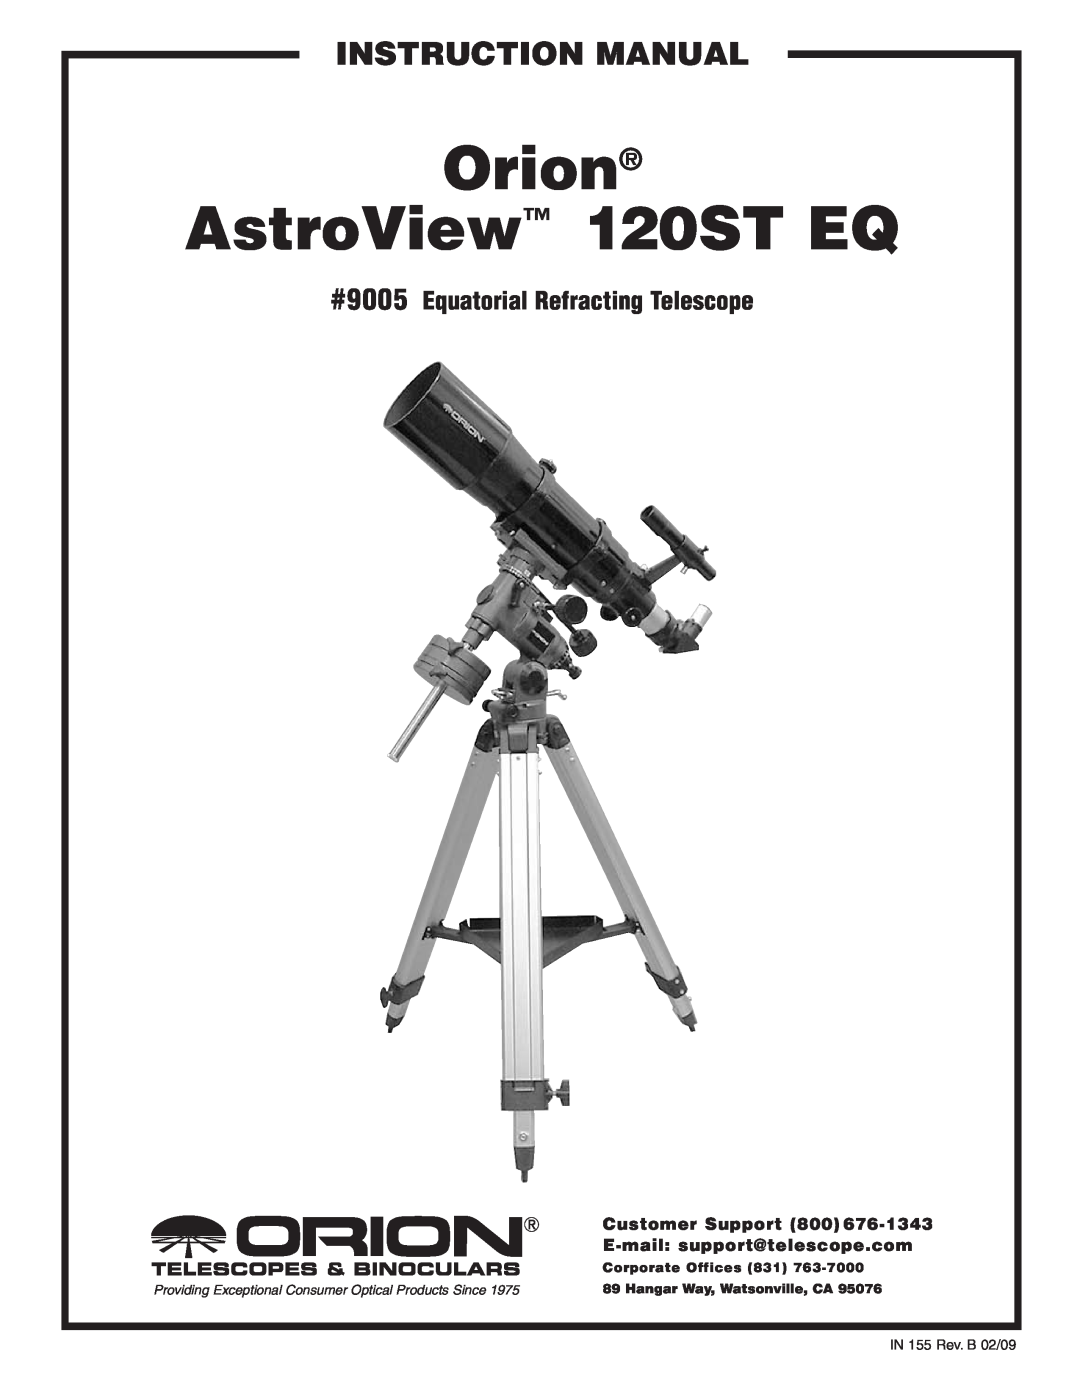 Orion 120ST EQ instruction manual Orion, AstroView, #9005 Equatorial Refracting Telescope, Customer Support 